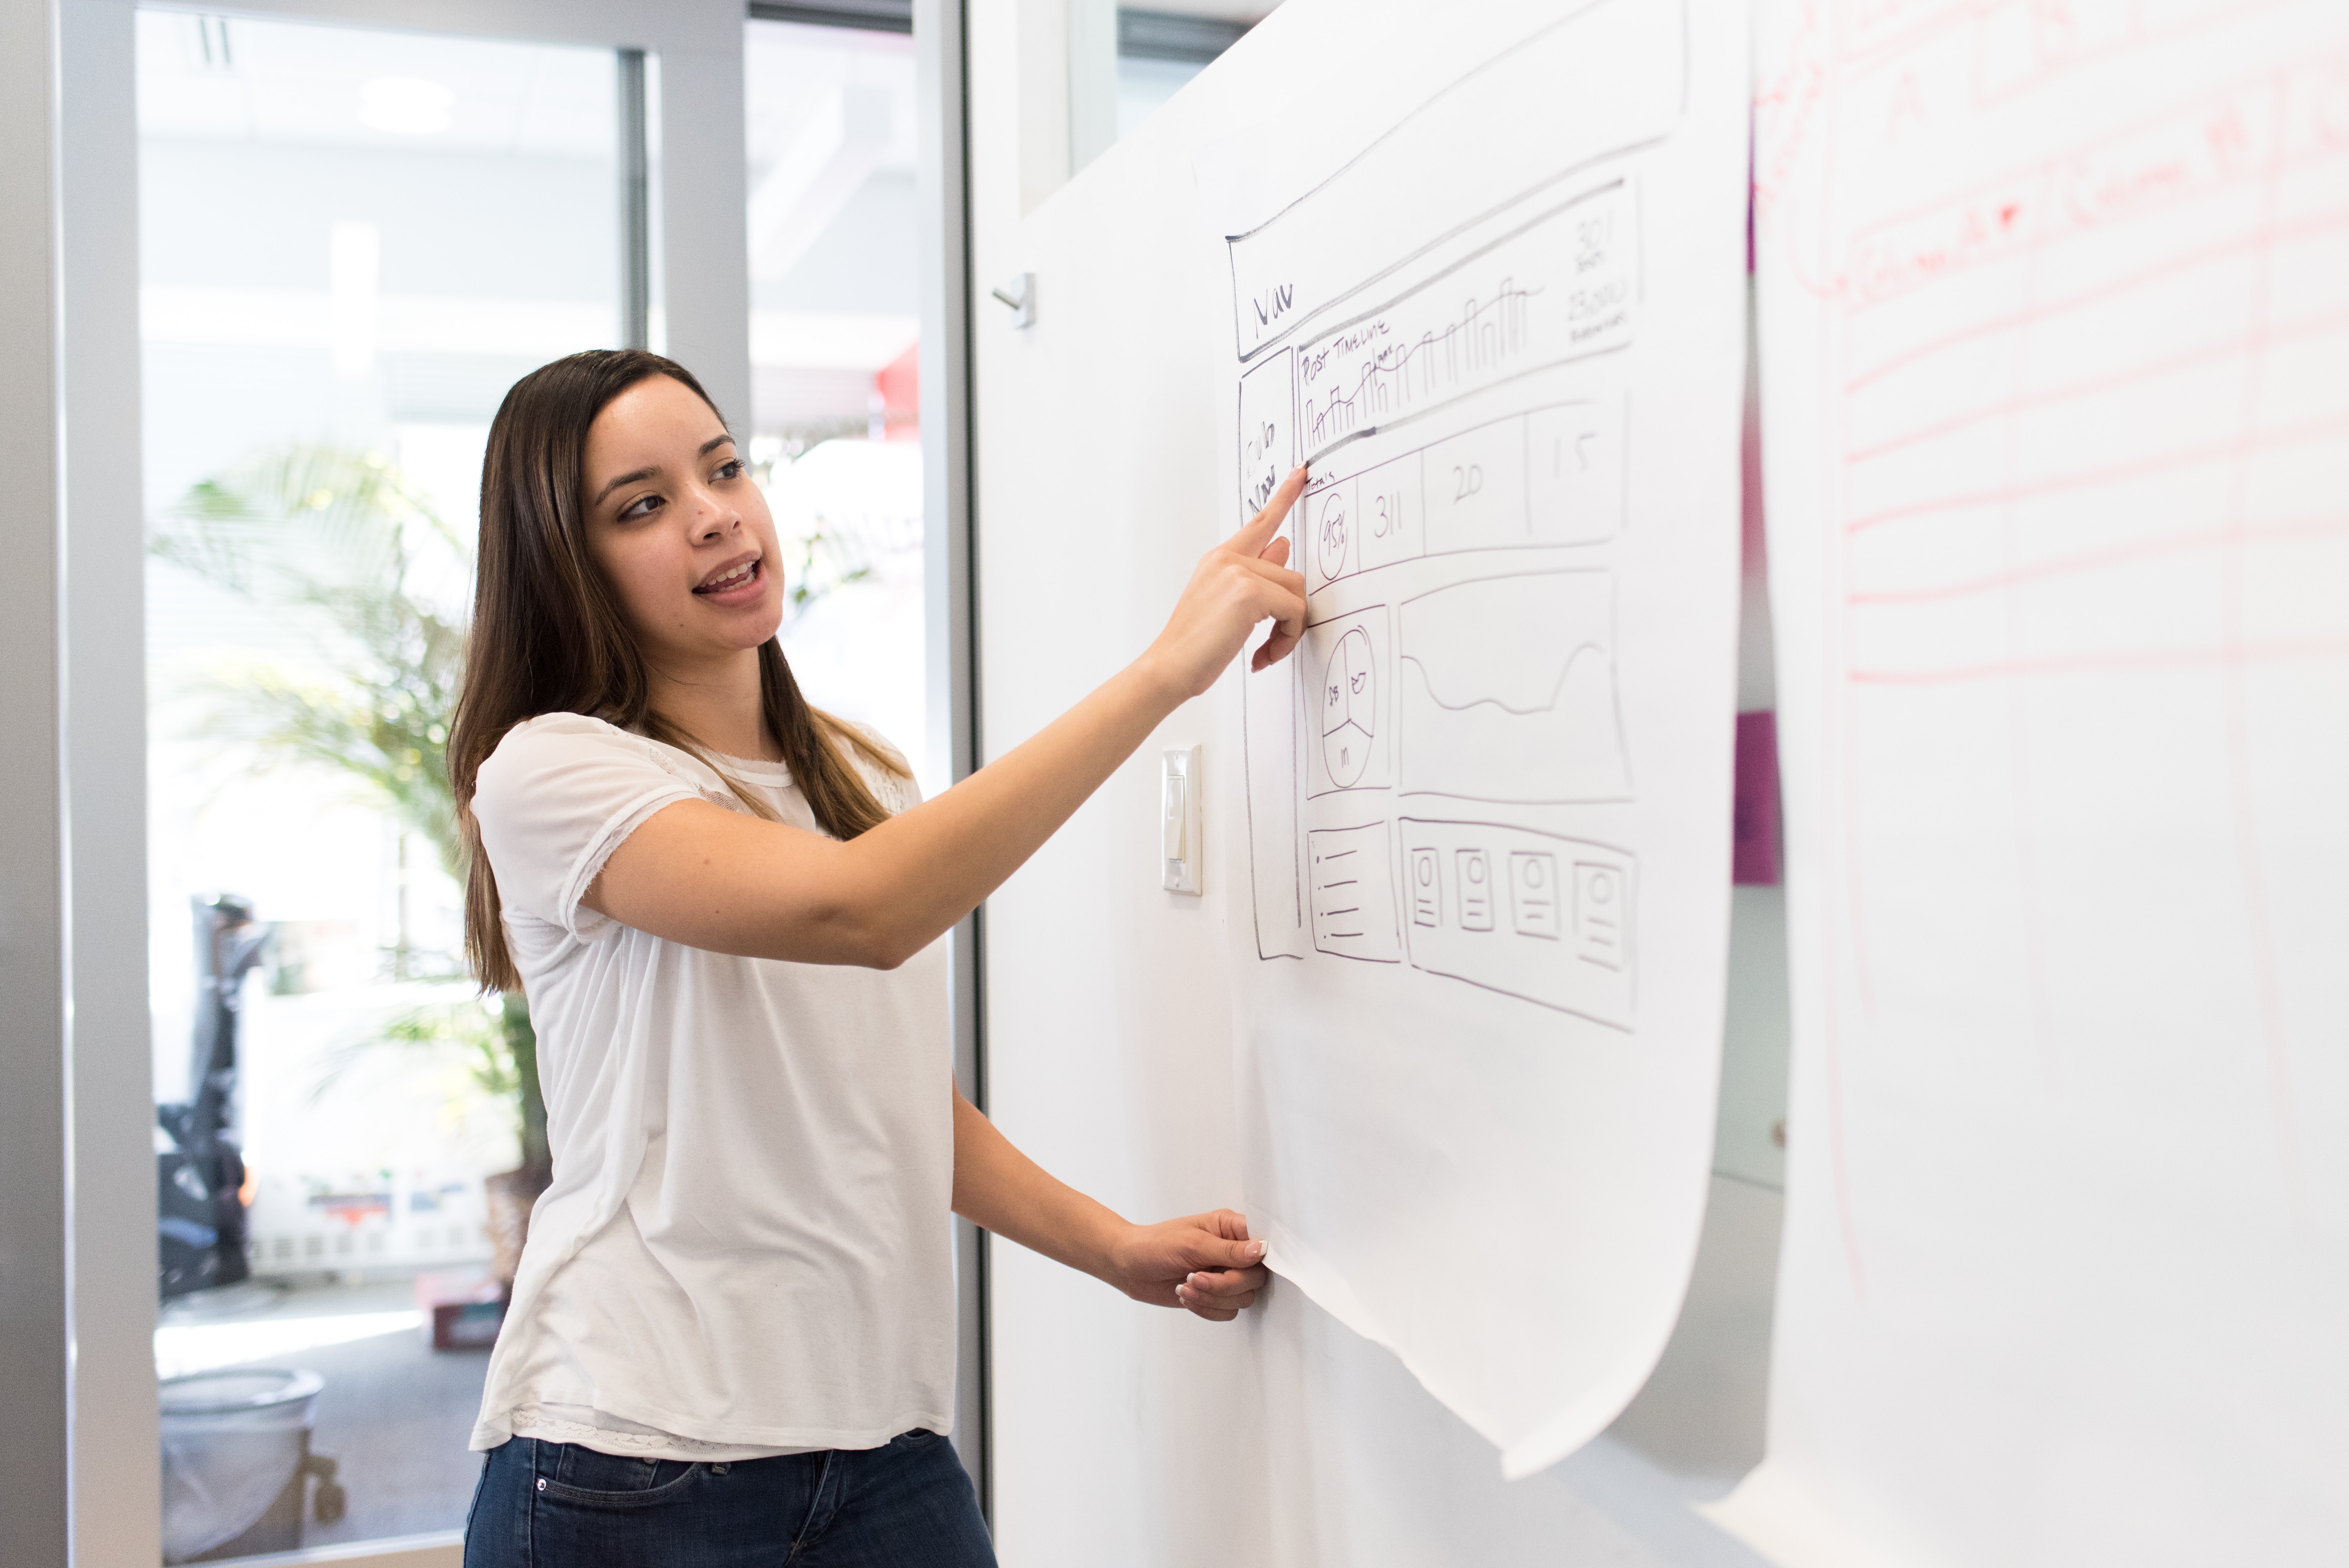 Lady pointing to text on white board